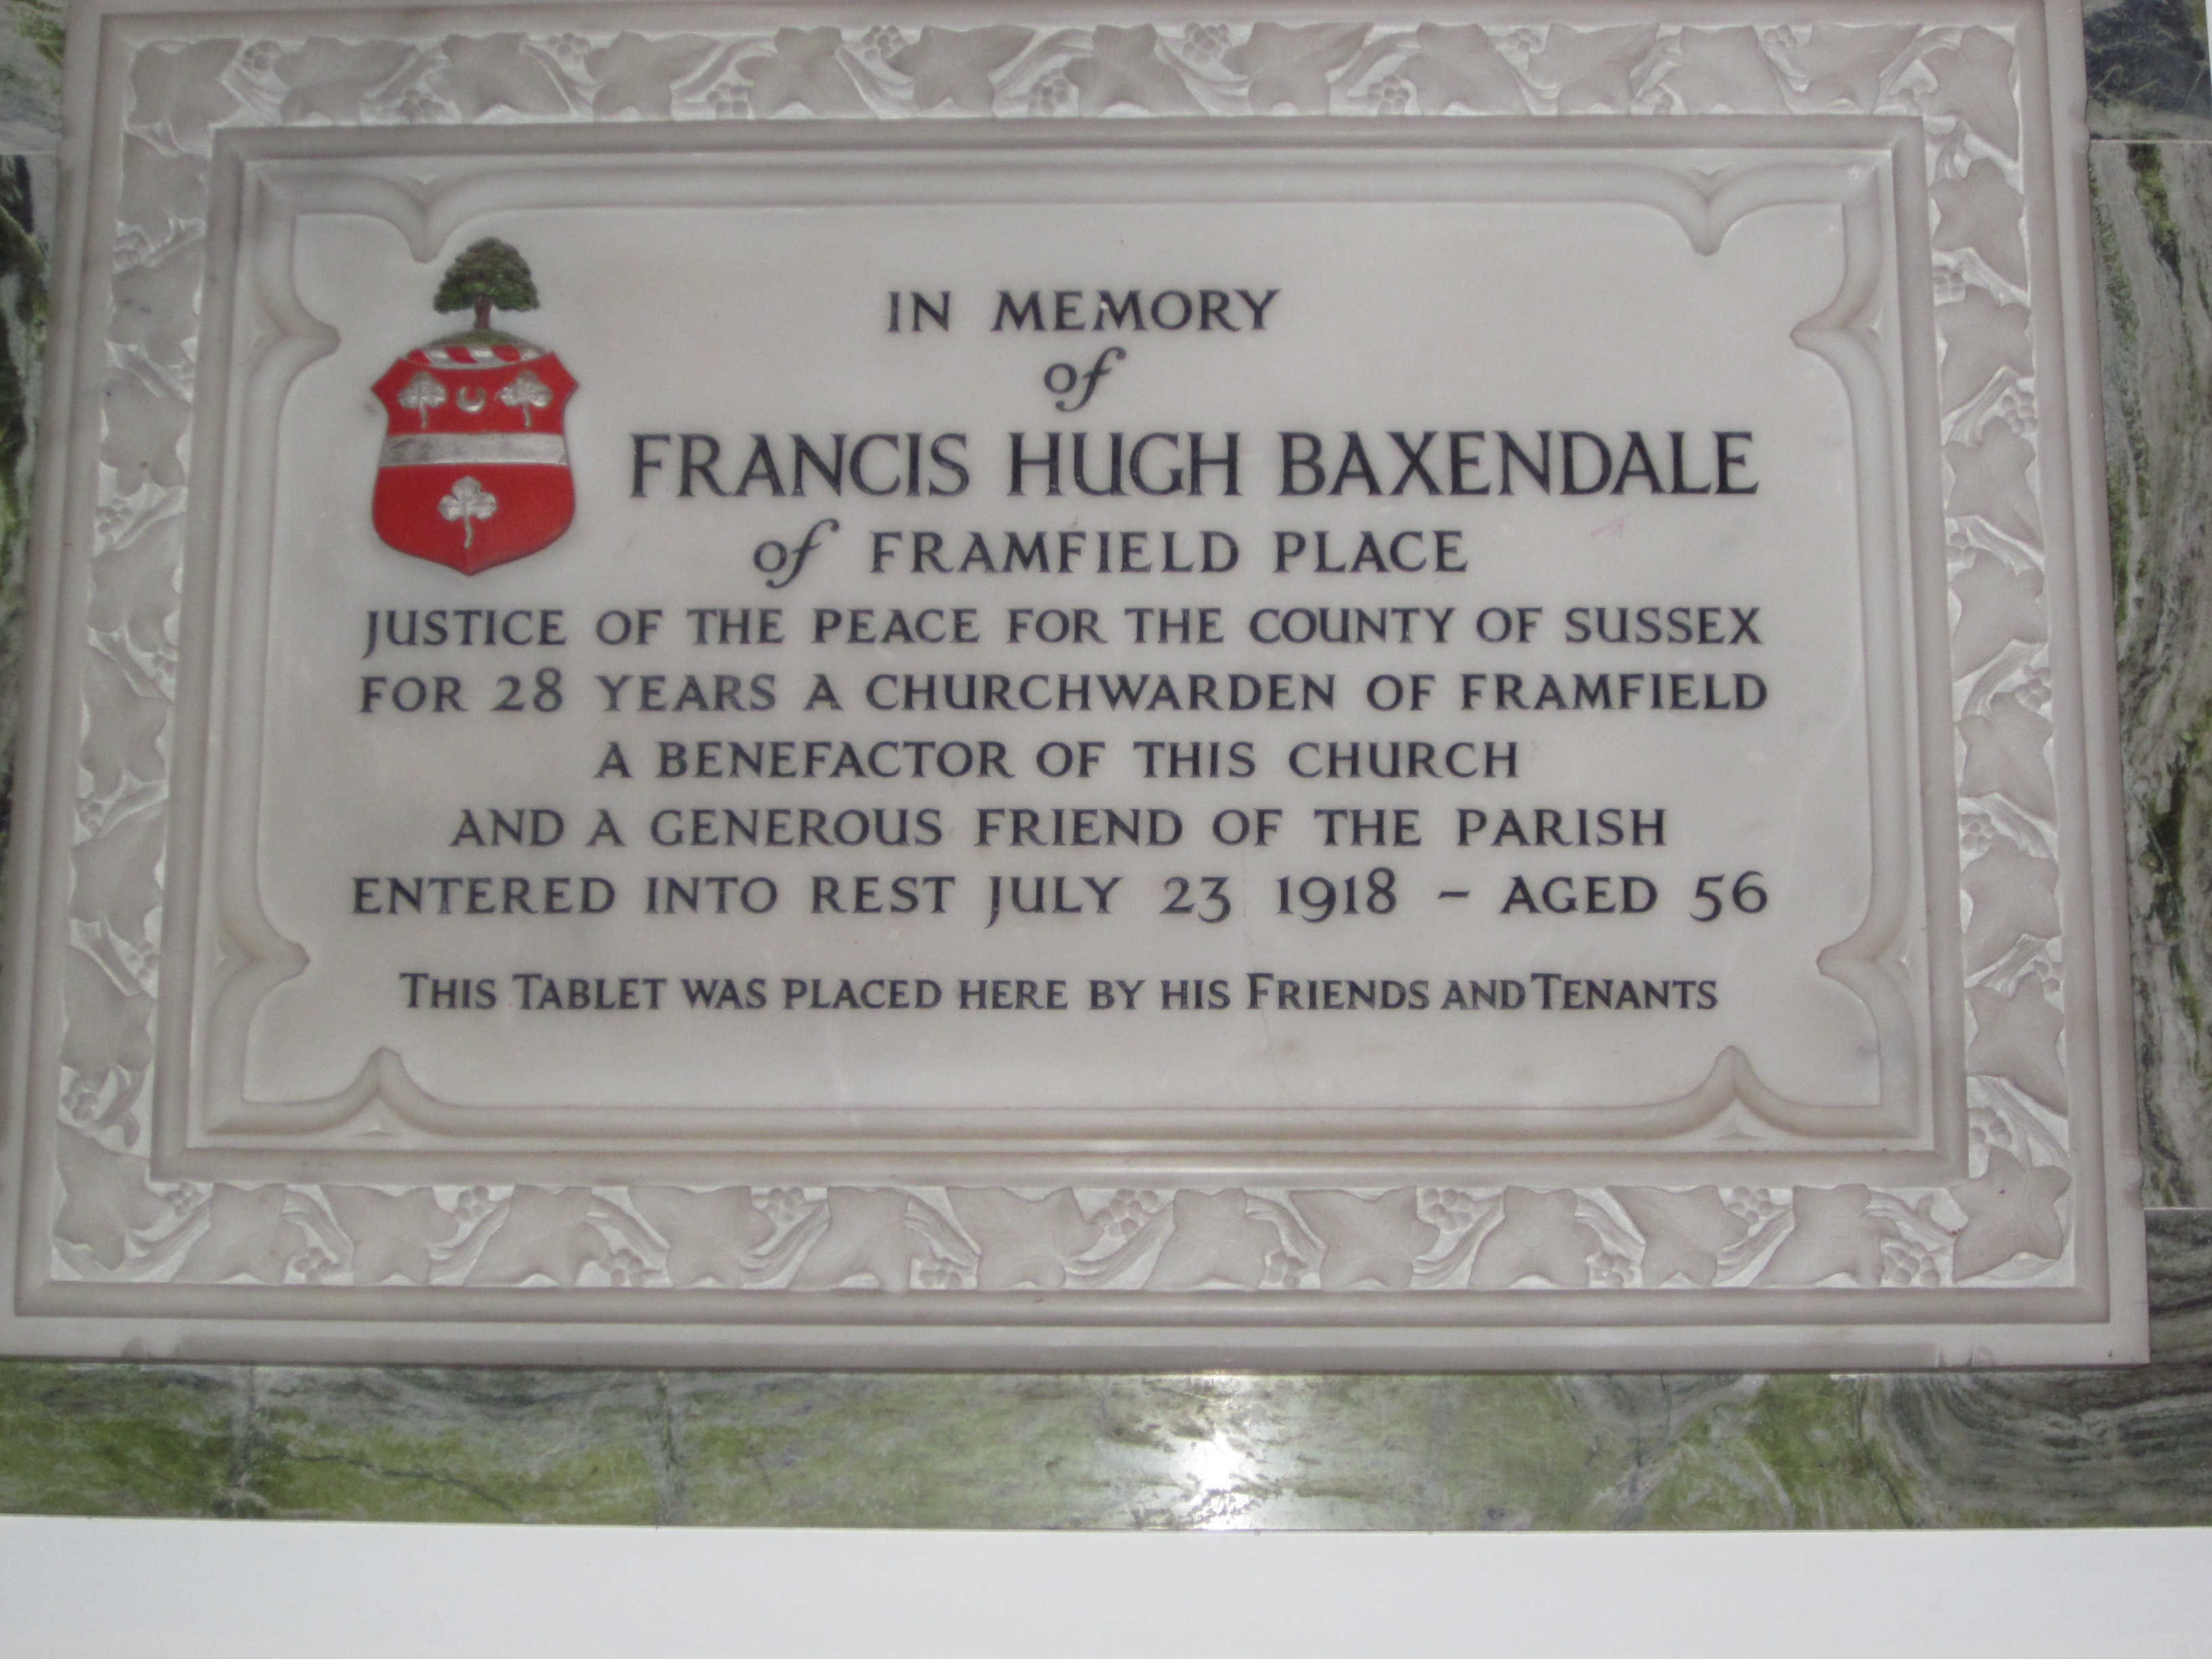 "In memory of Francis Hugh Baxendale of Framfield Place Justice of the Peace for the County of Sussex. For 28 years a Churchwarden of Framfield. A benefactor of this Church and a generous friend of the Parish. Entered into rest July 23 1918 aged 56. This tablet was placed here by his friends and tenants."